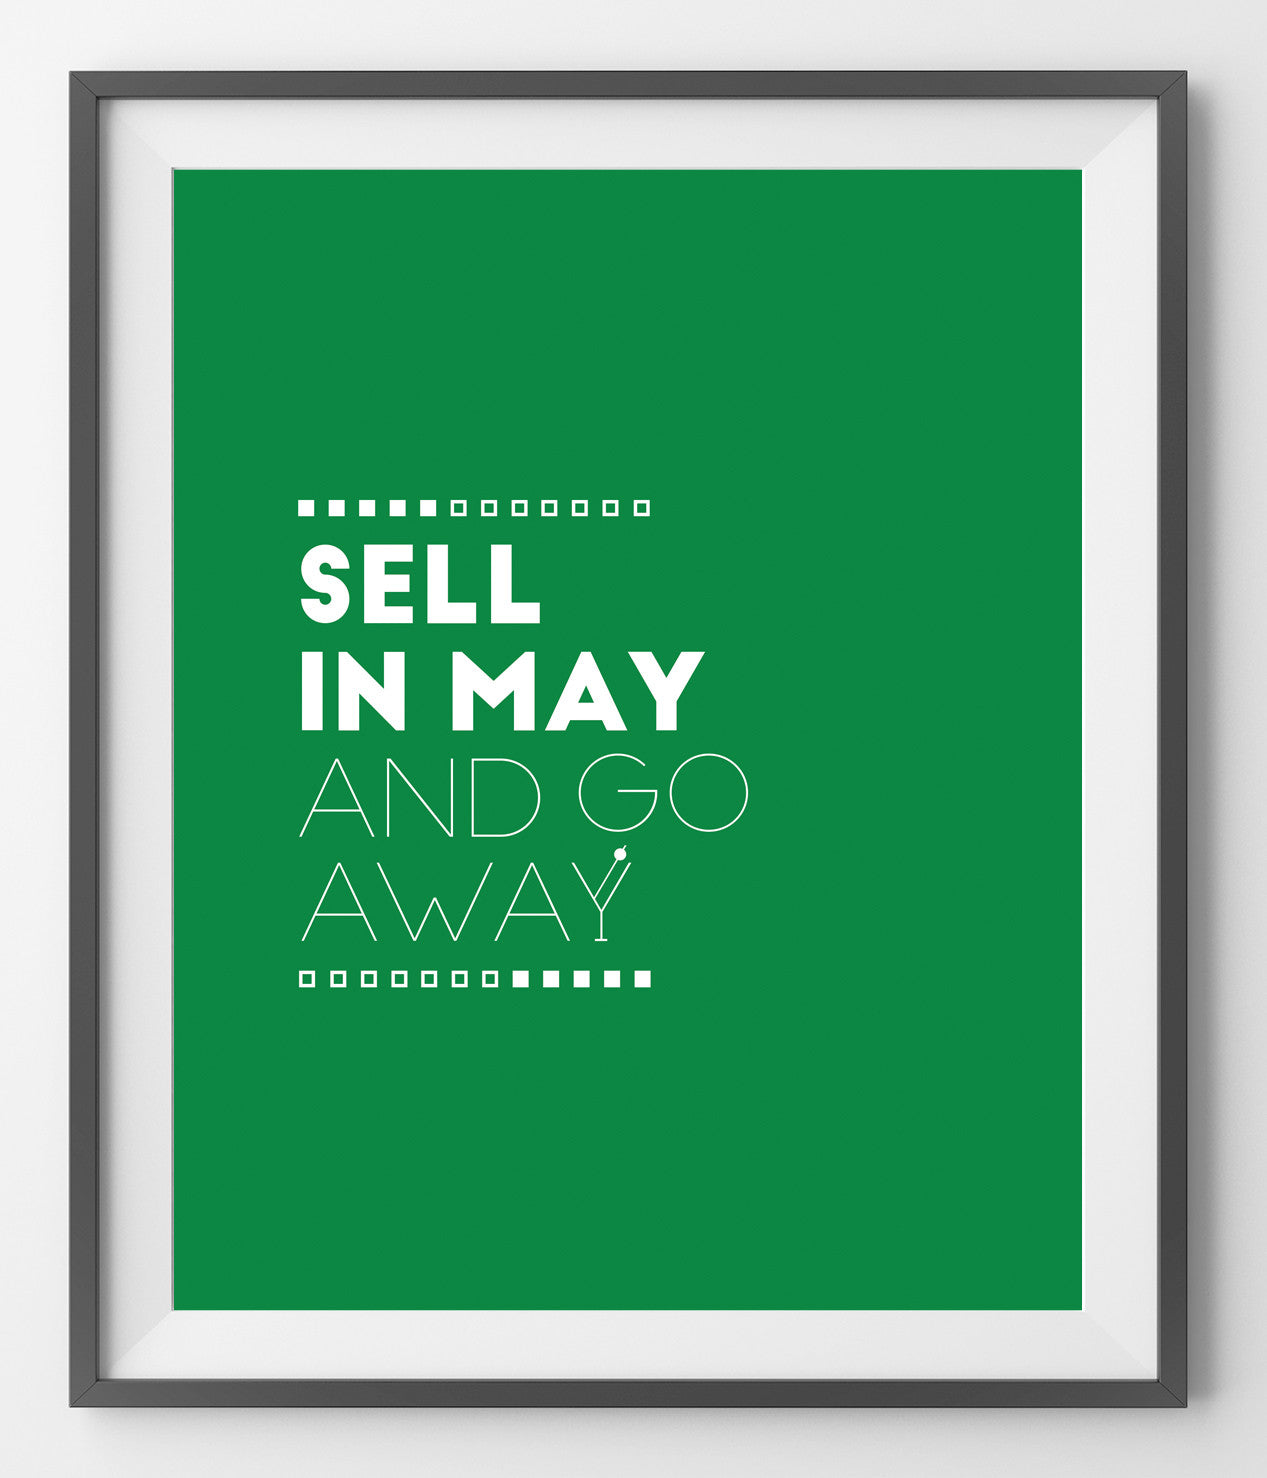 Sell in May and go away - QUOTATIUM - 1